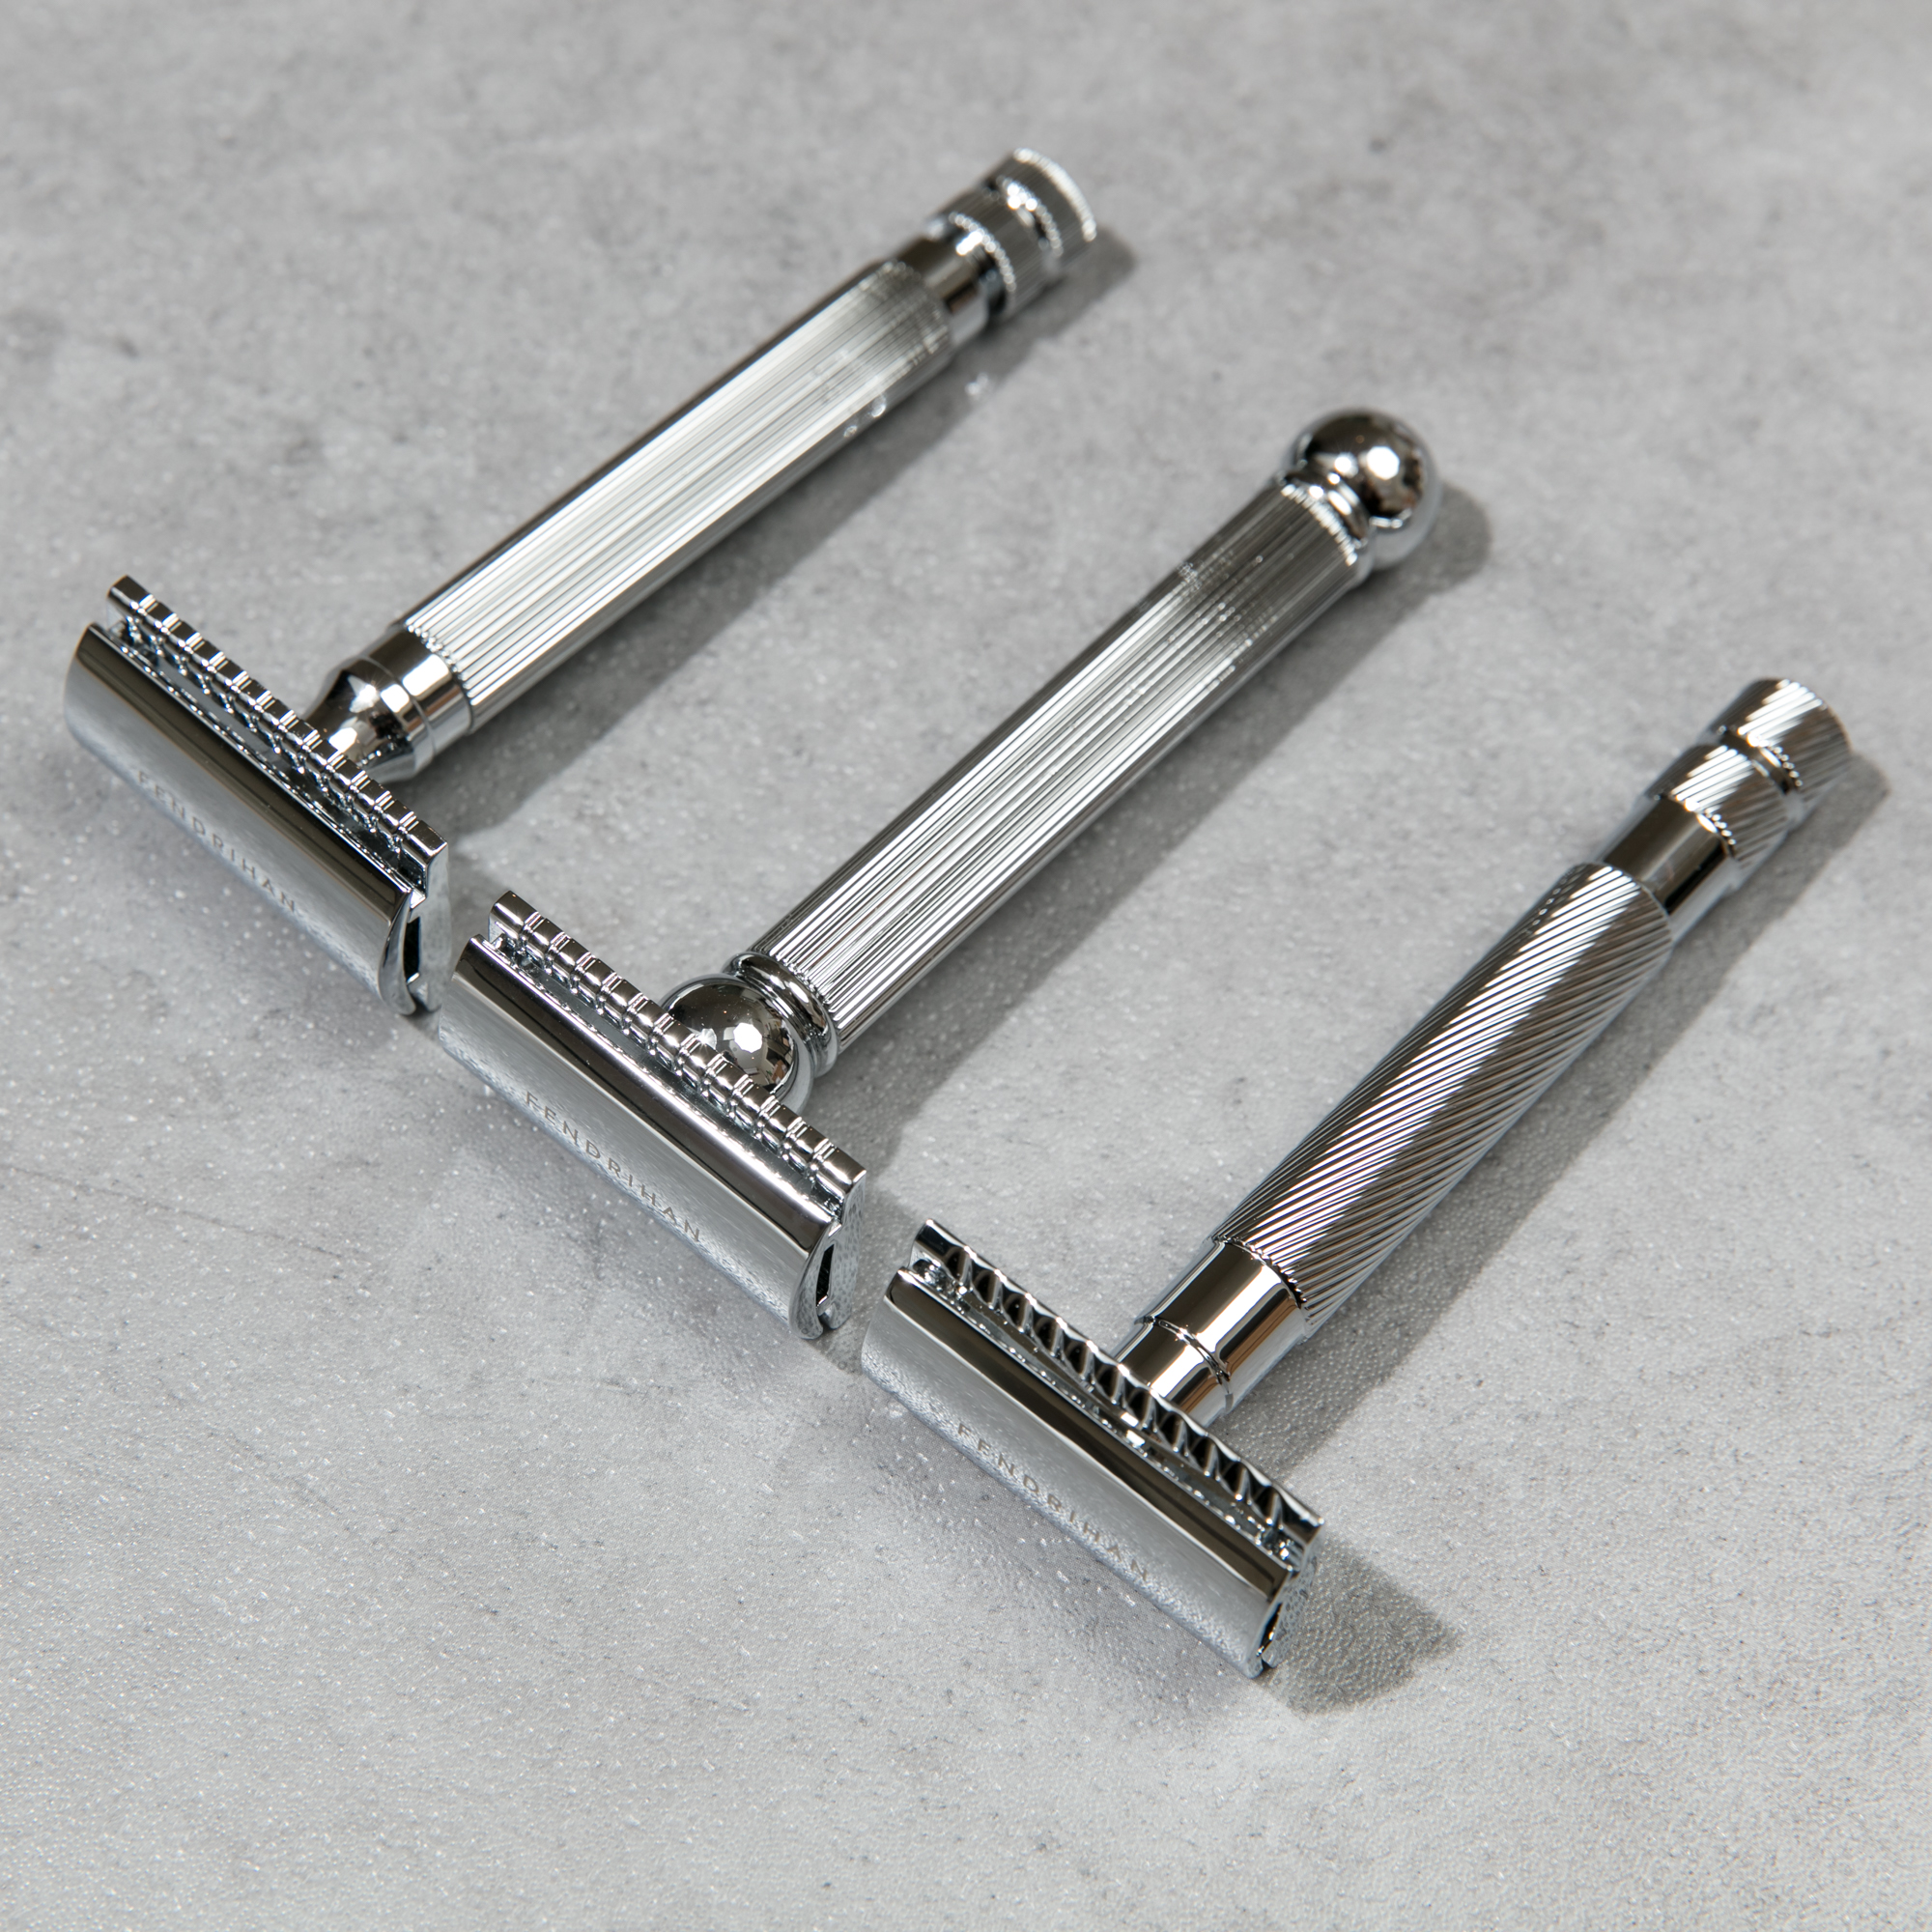 Open or Closed Comb: Choosing a Safety Razor